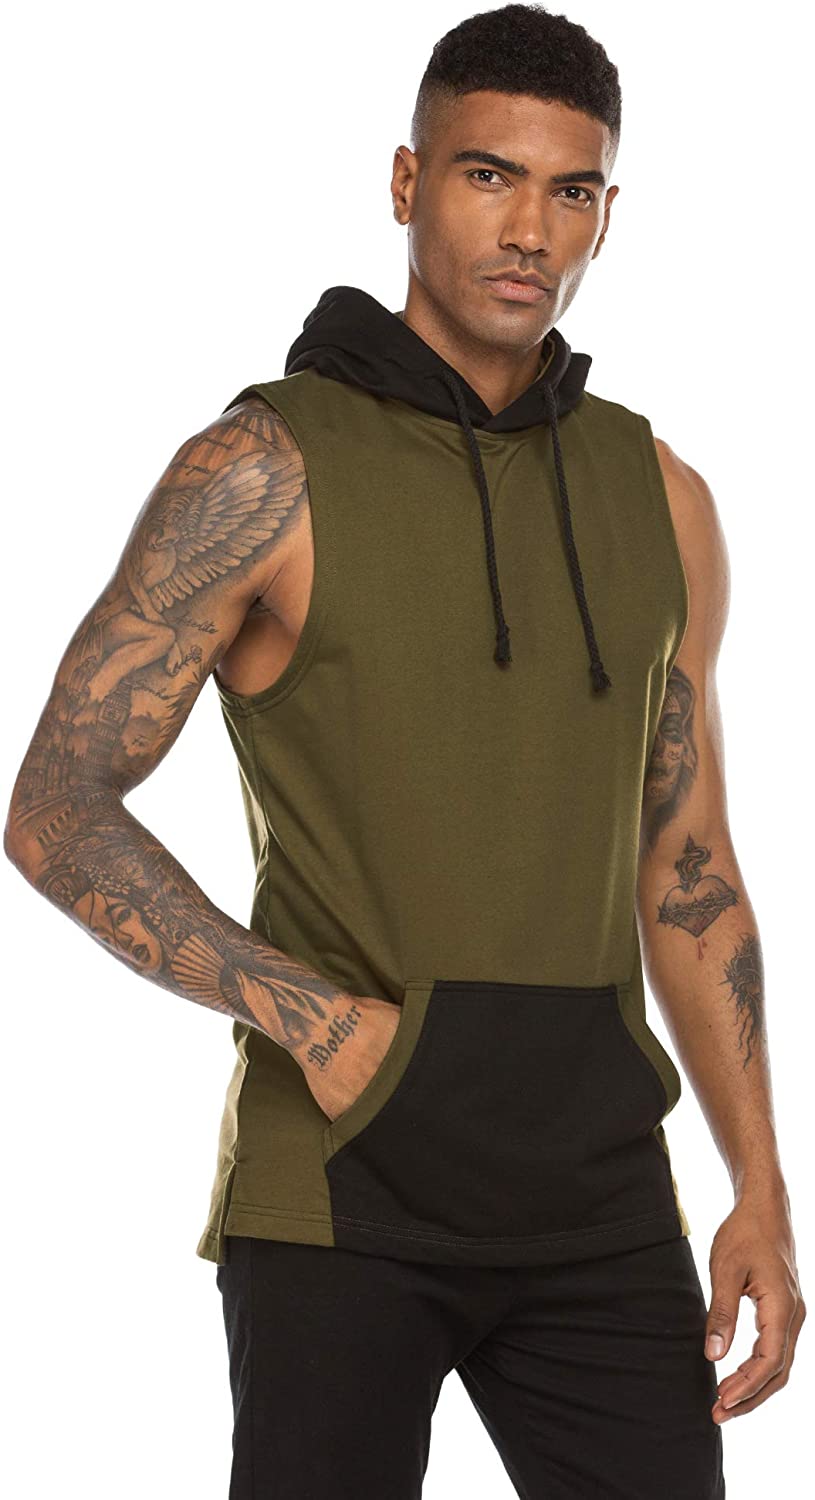 COOFANDY Men's Workout Gym Hooded Tank Top Sleeveless Cut Off Fashion T ...